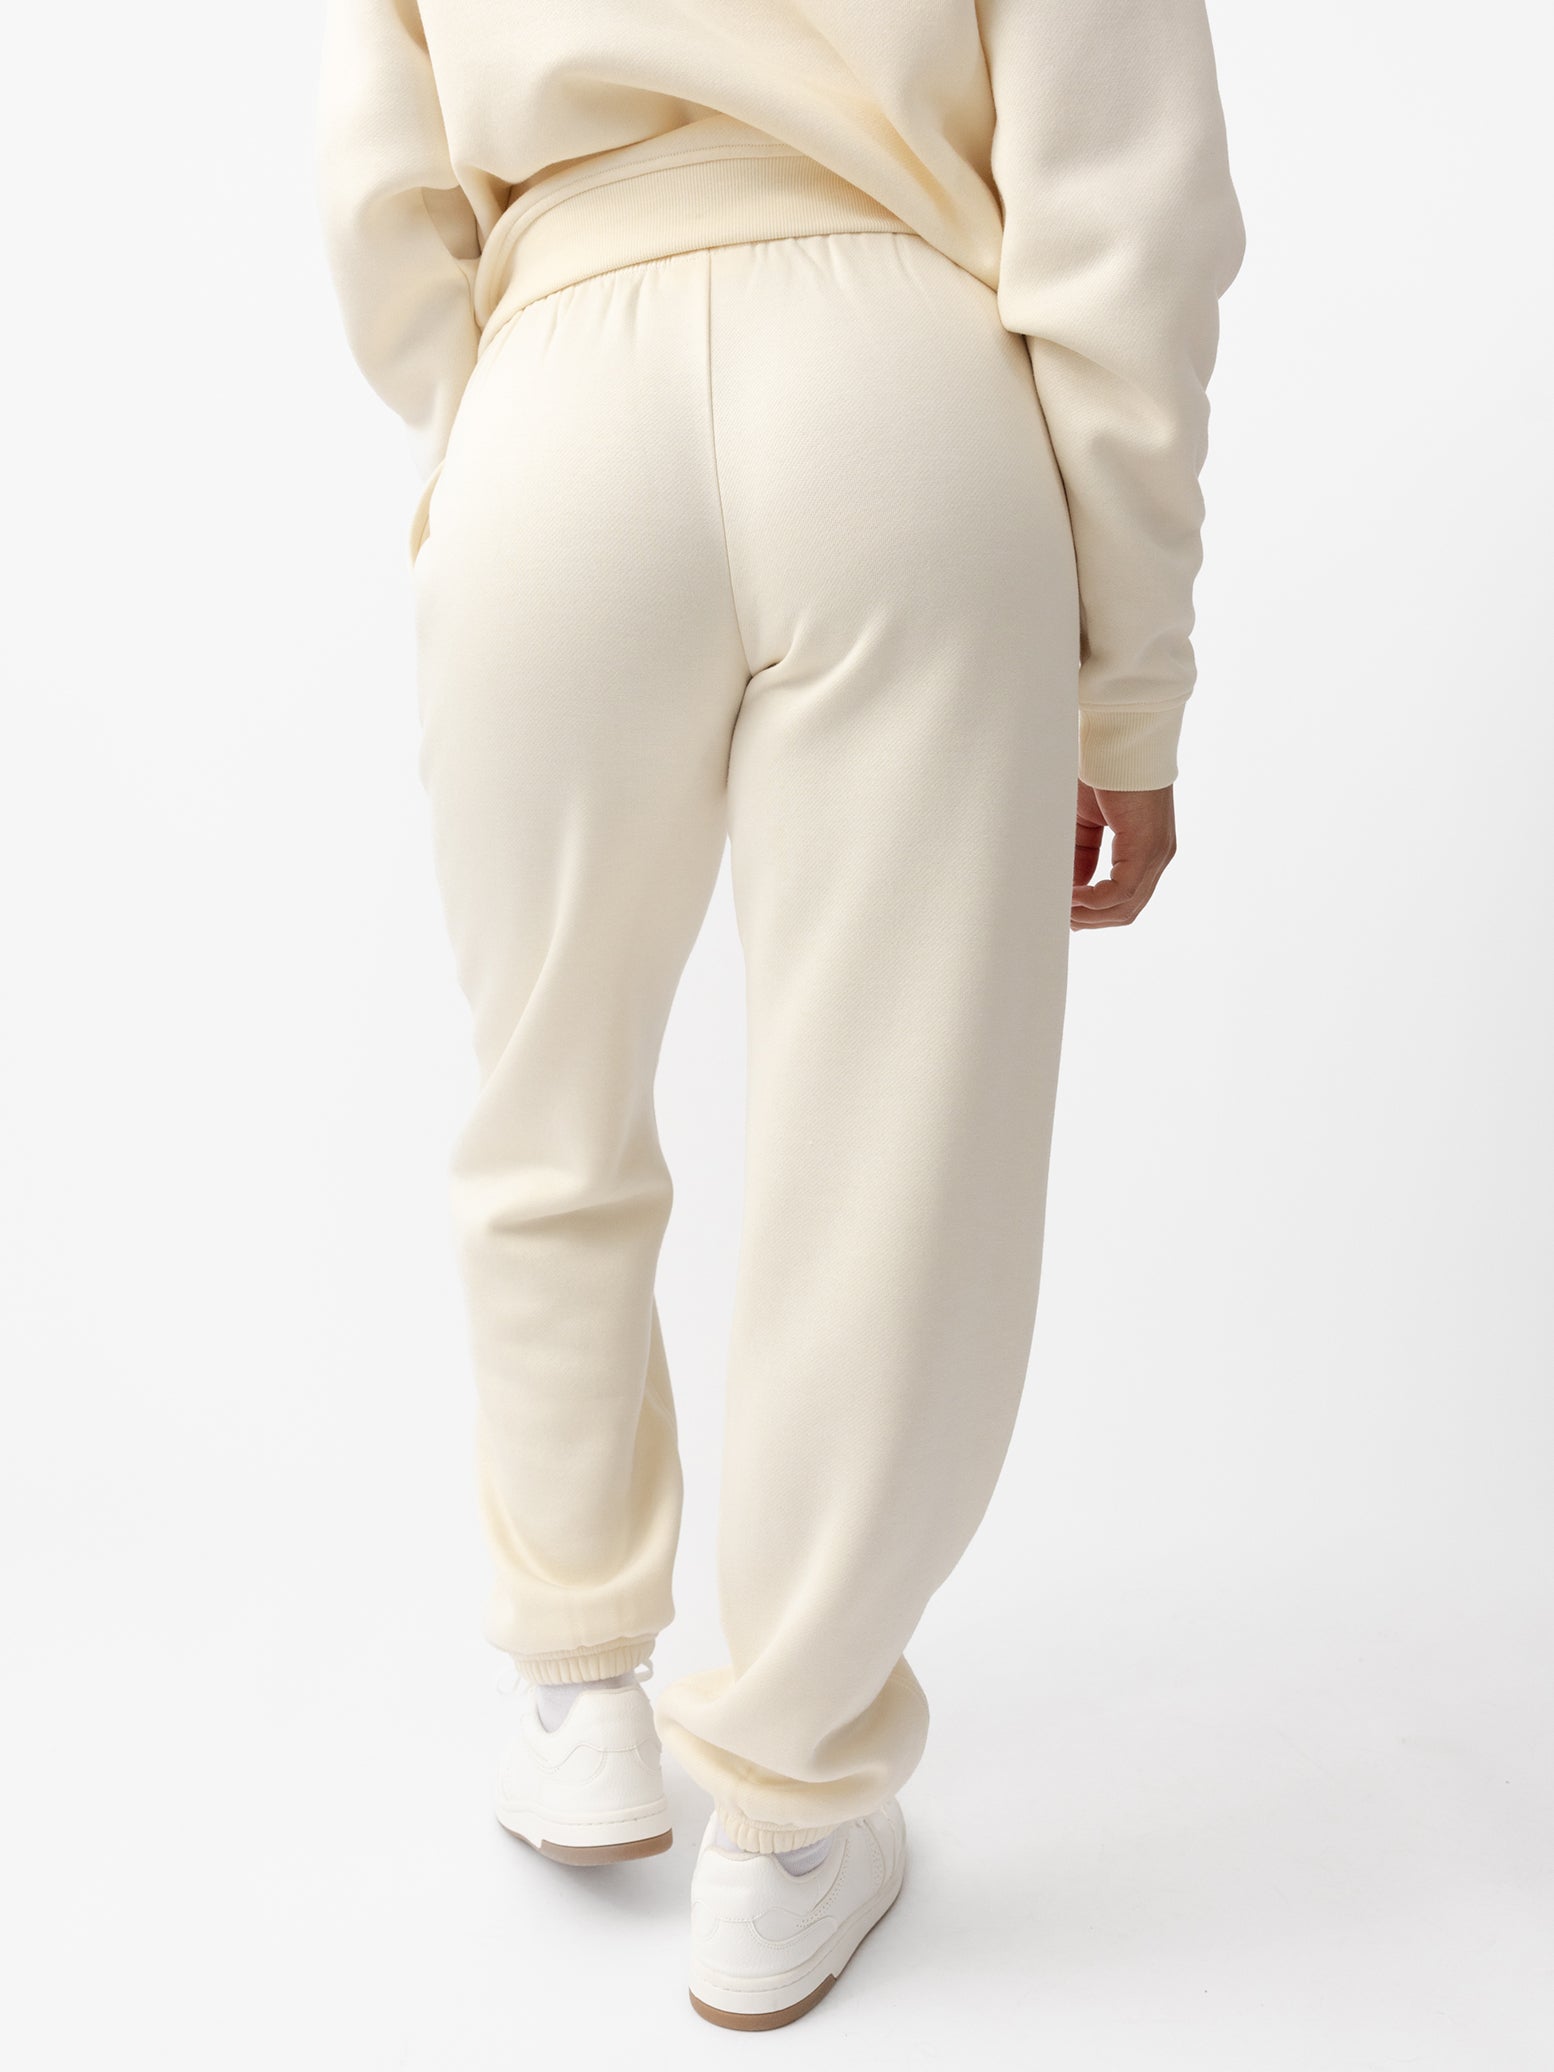  Woman wearing Alabaster CityScape Sweat Pant with white background 